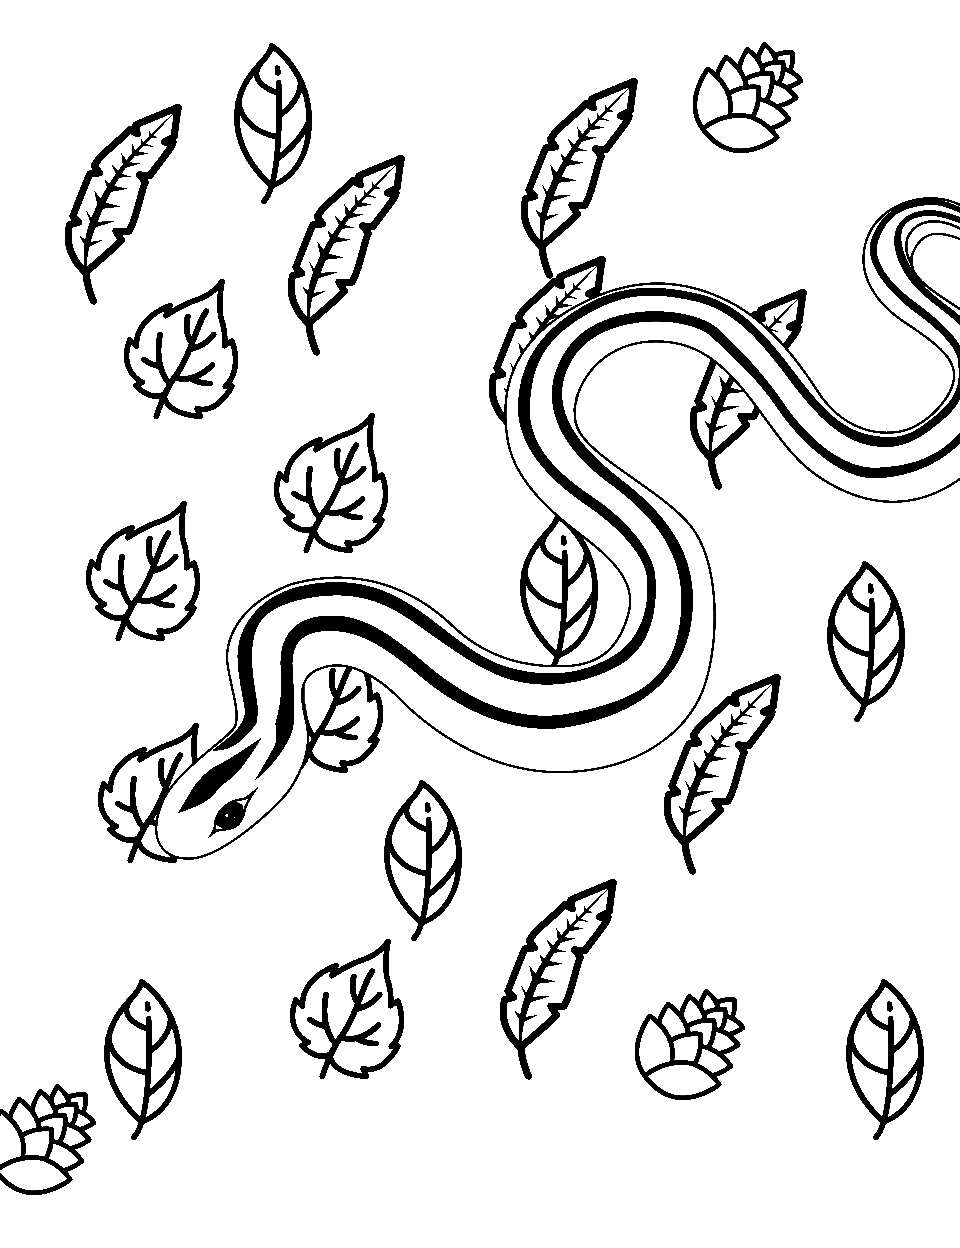 Forest Floor Crawler Coloring Page - A snake slithering through the fallen leaves of a forest floor.